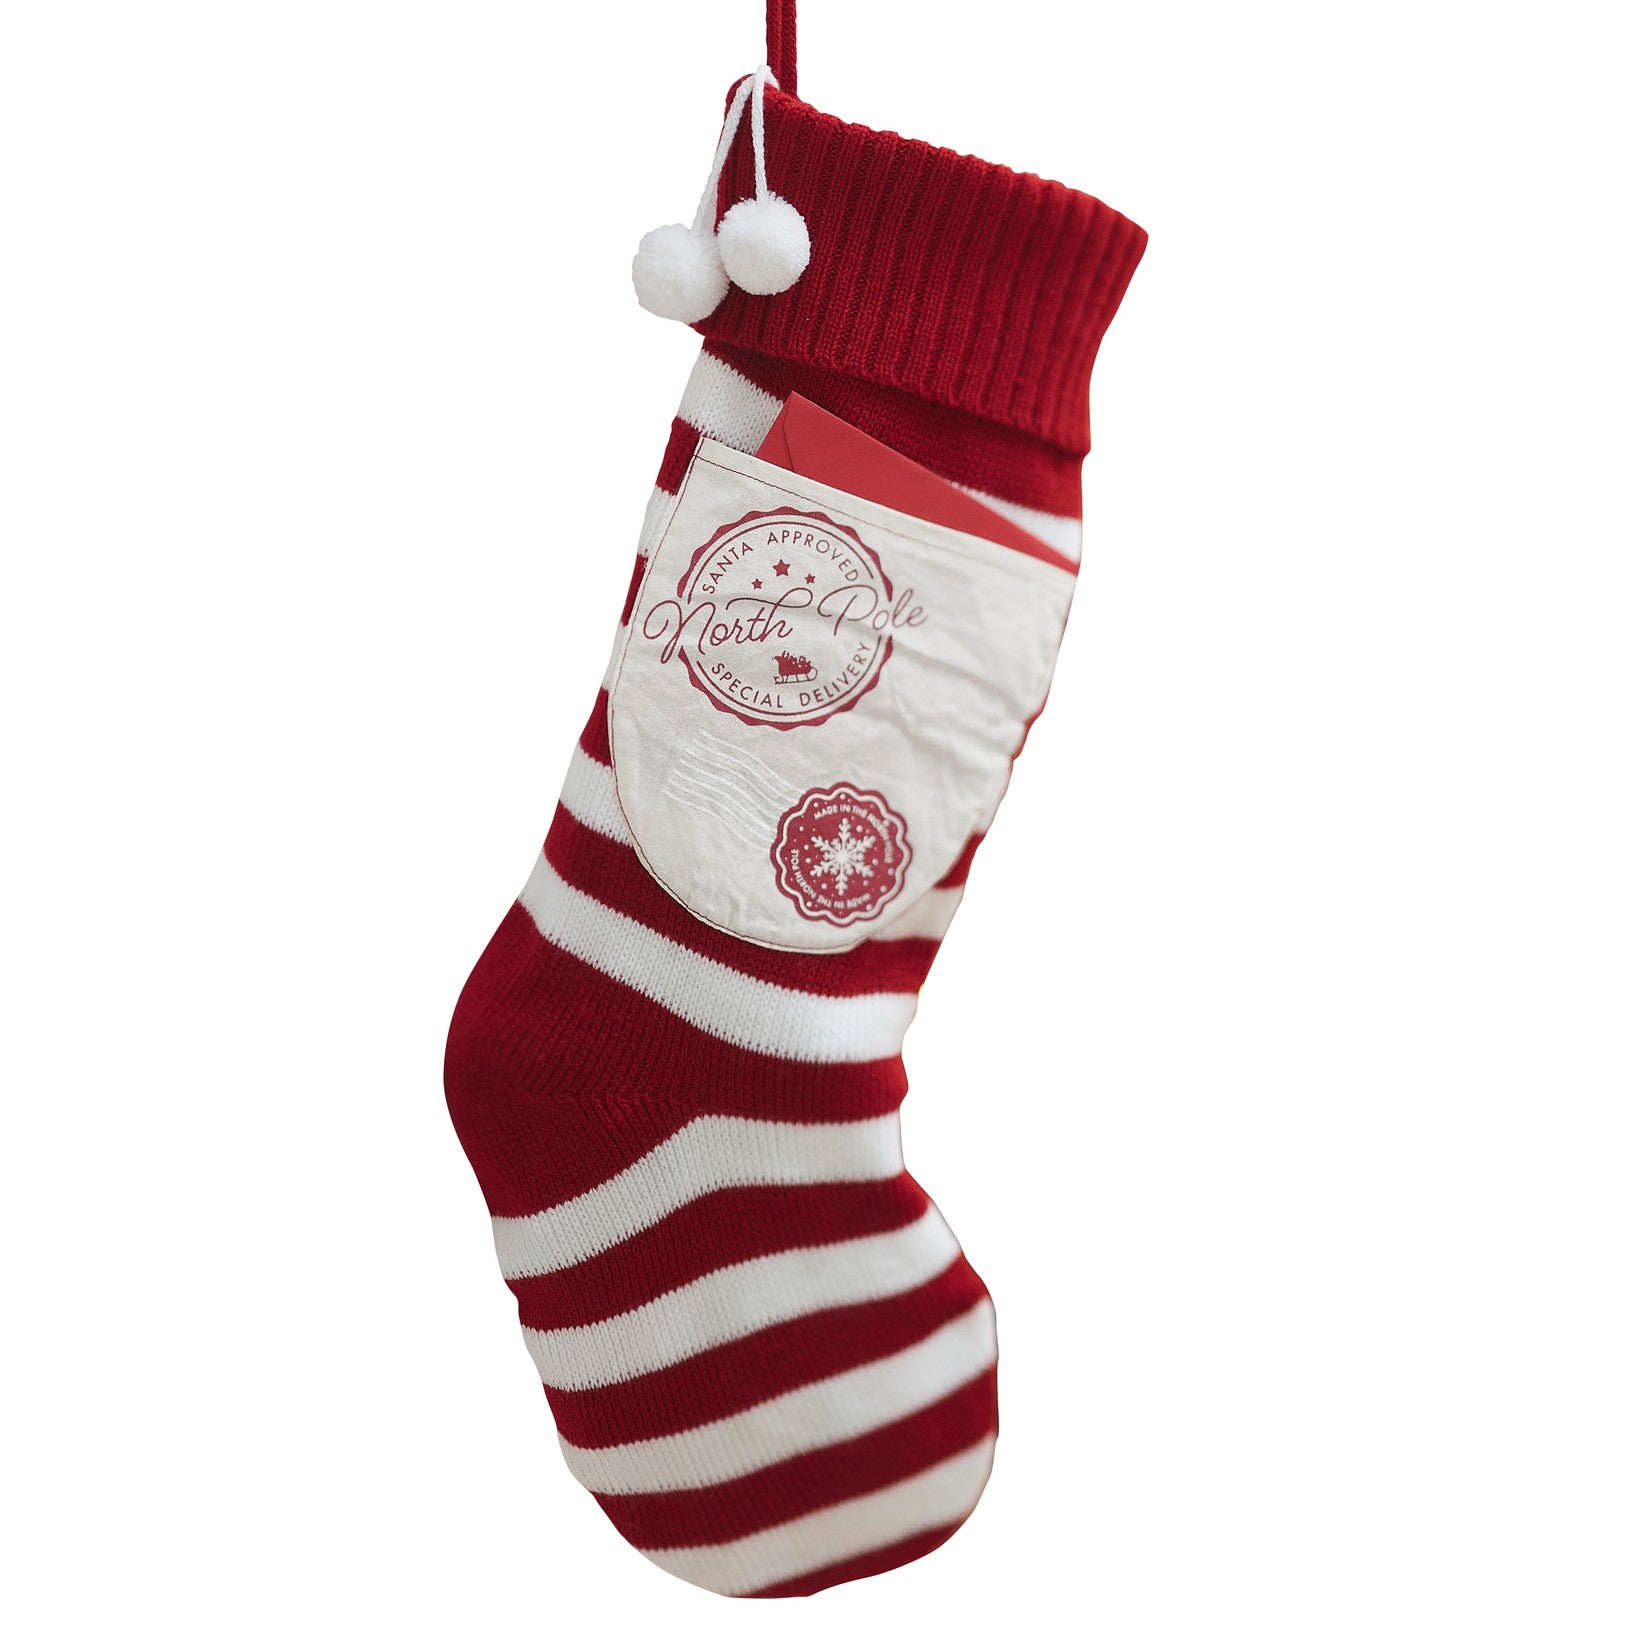 Christmas stocking with stripes and pocket